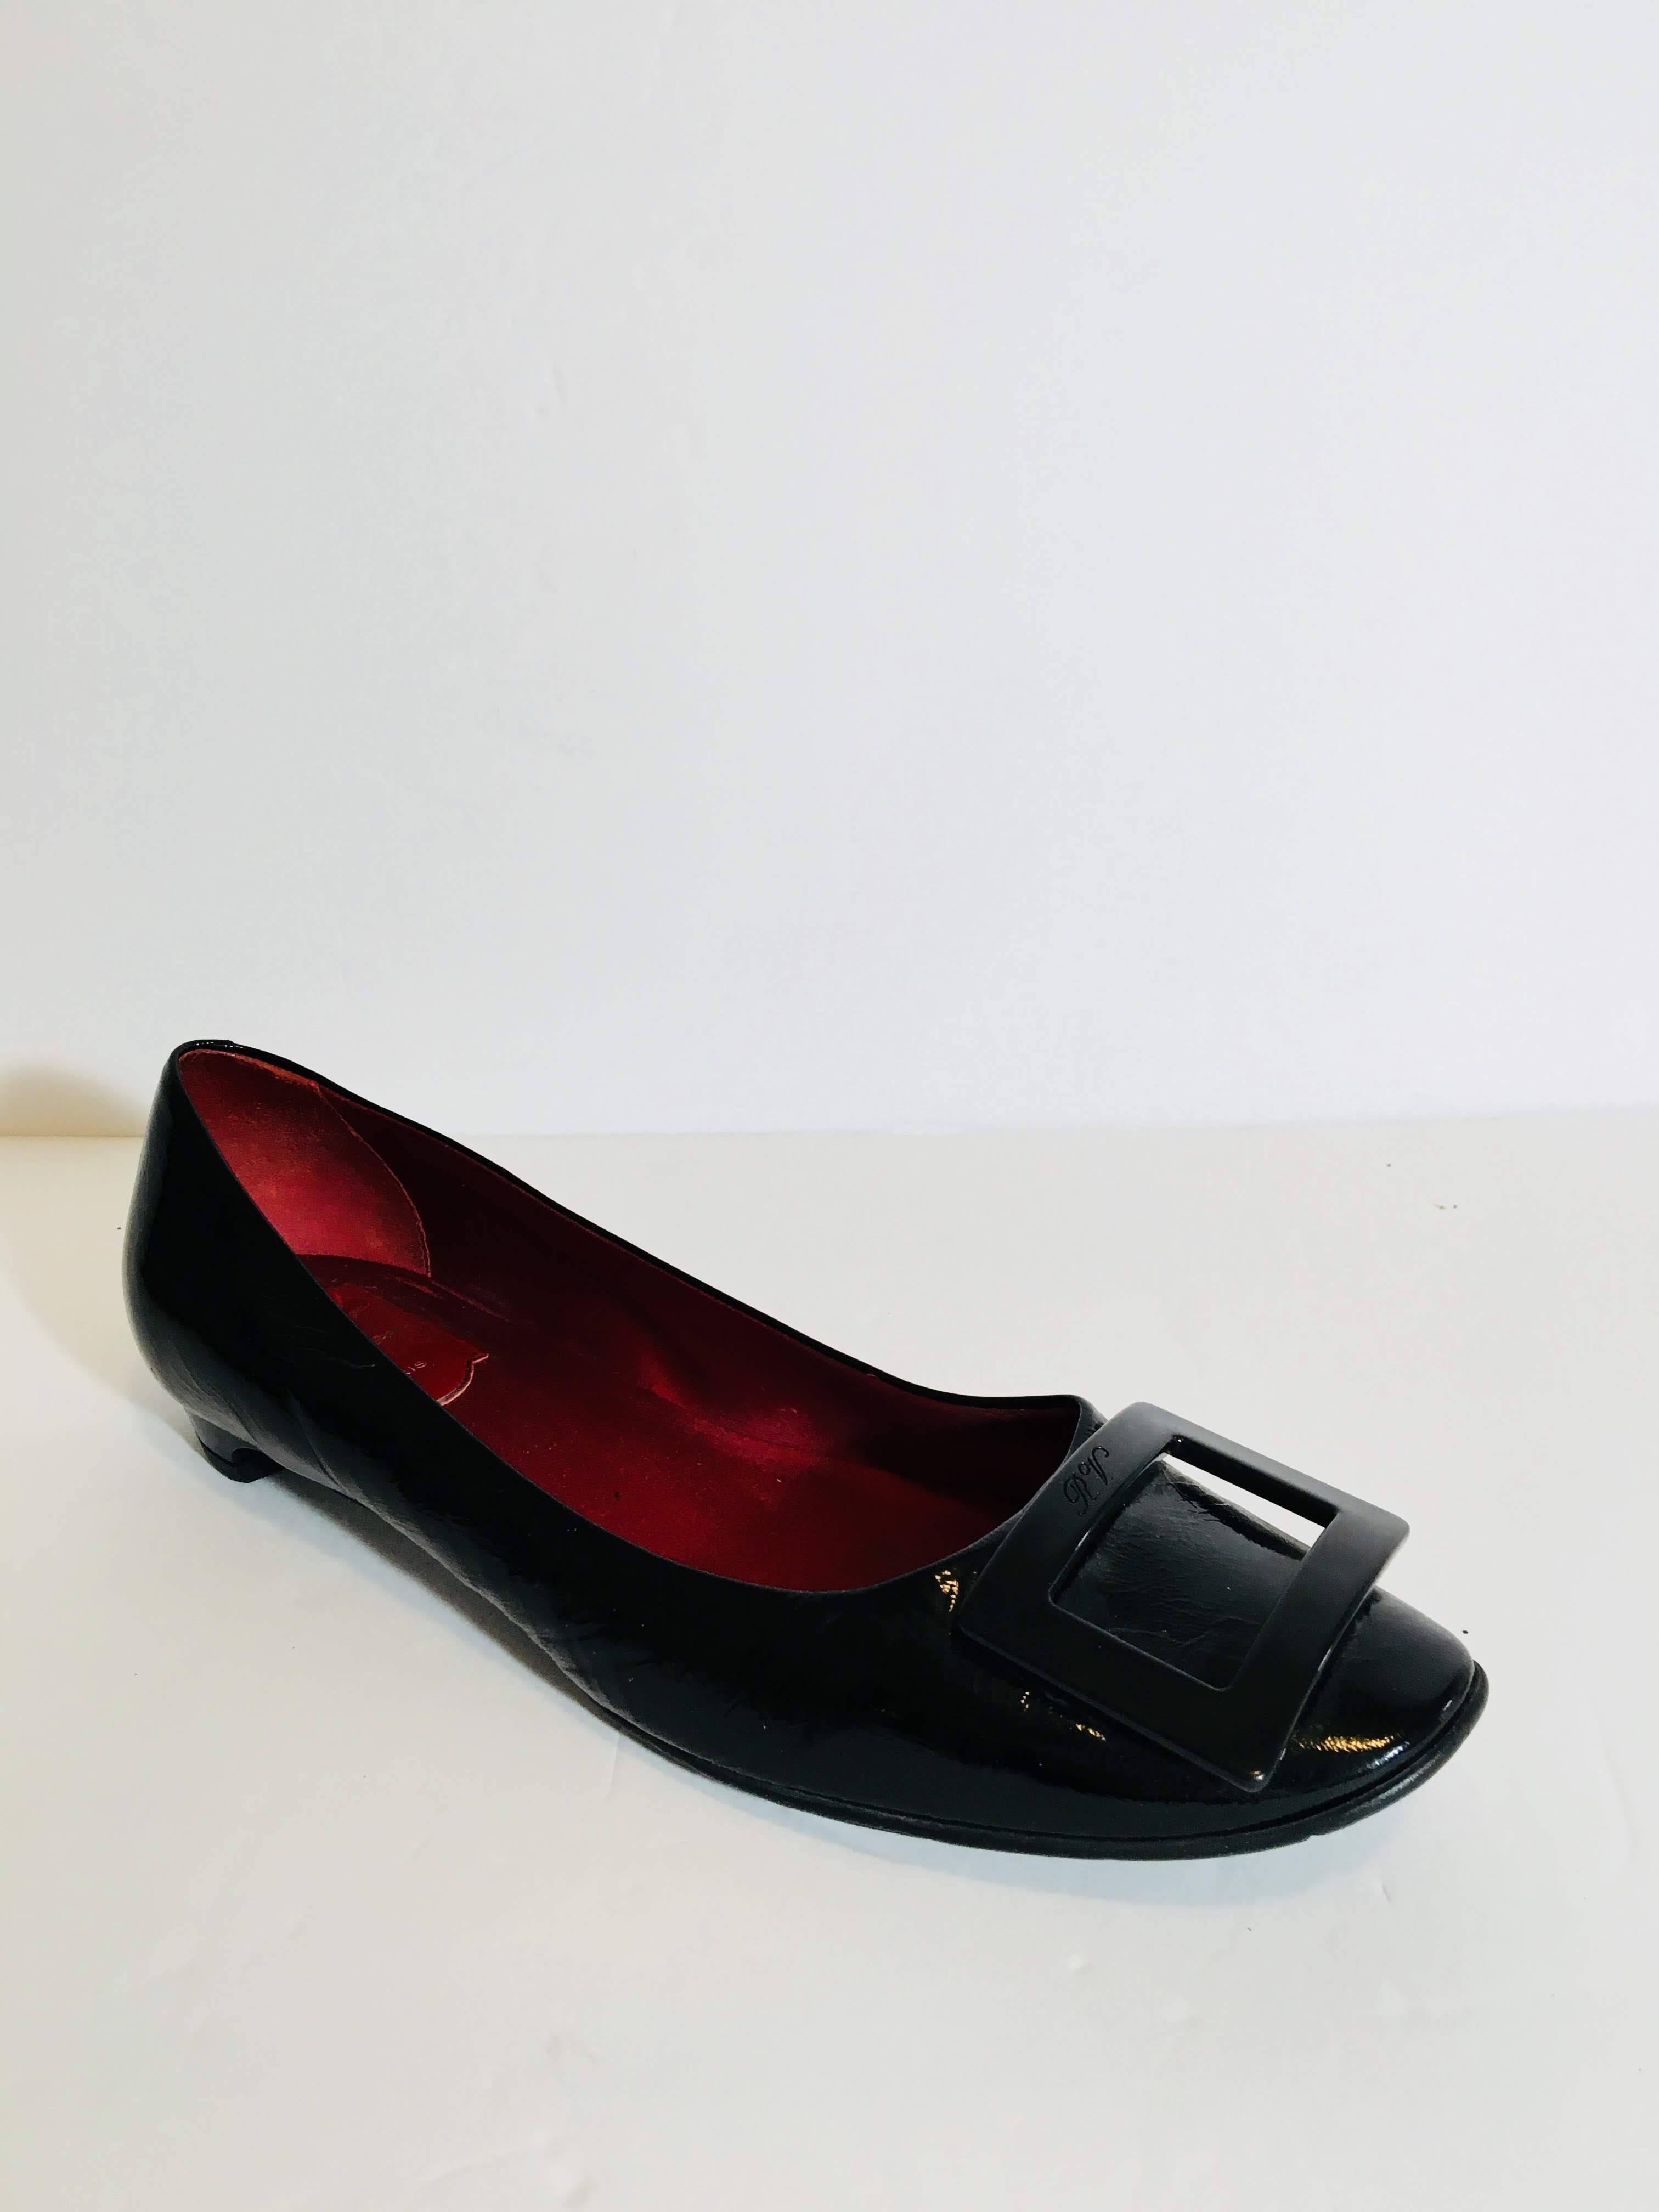 Roger Vivier Black Patent Leather Ballet Flats with Kitten Heel and Square Embellishment at Toe.